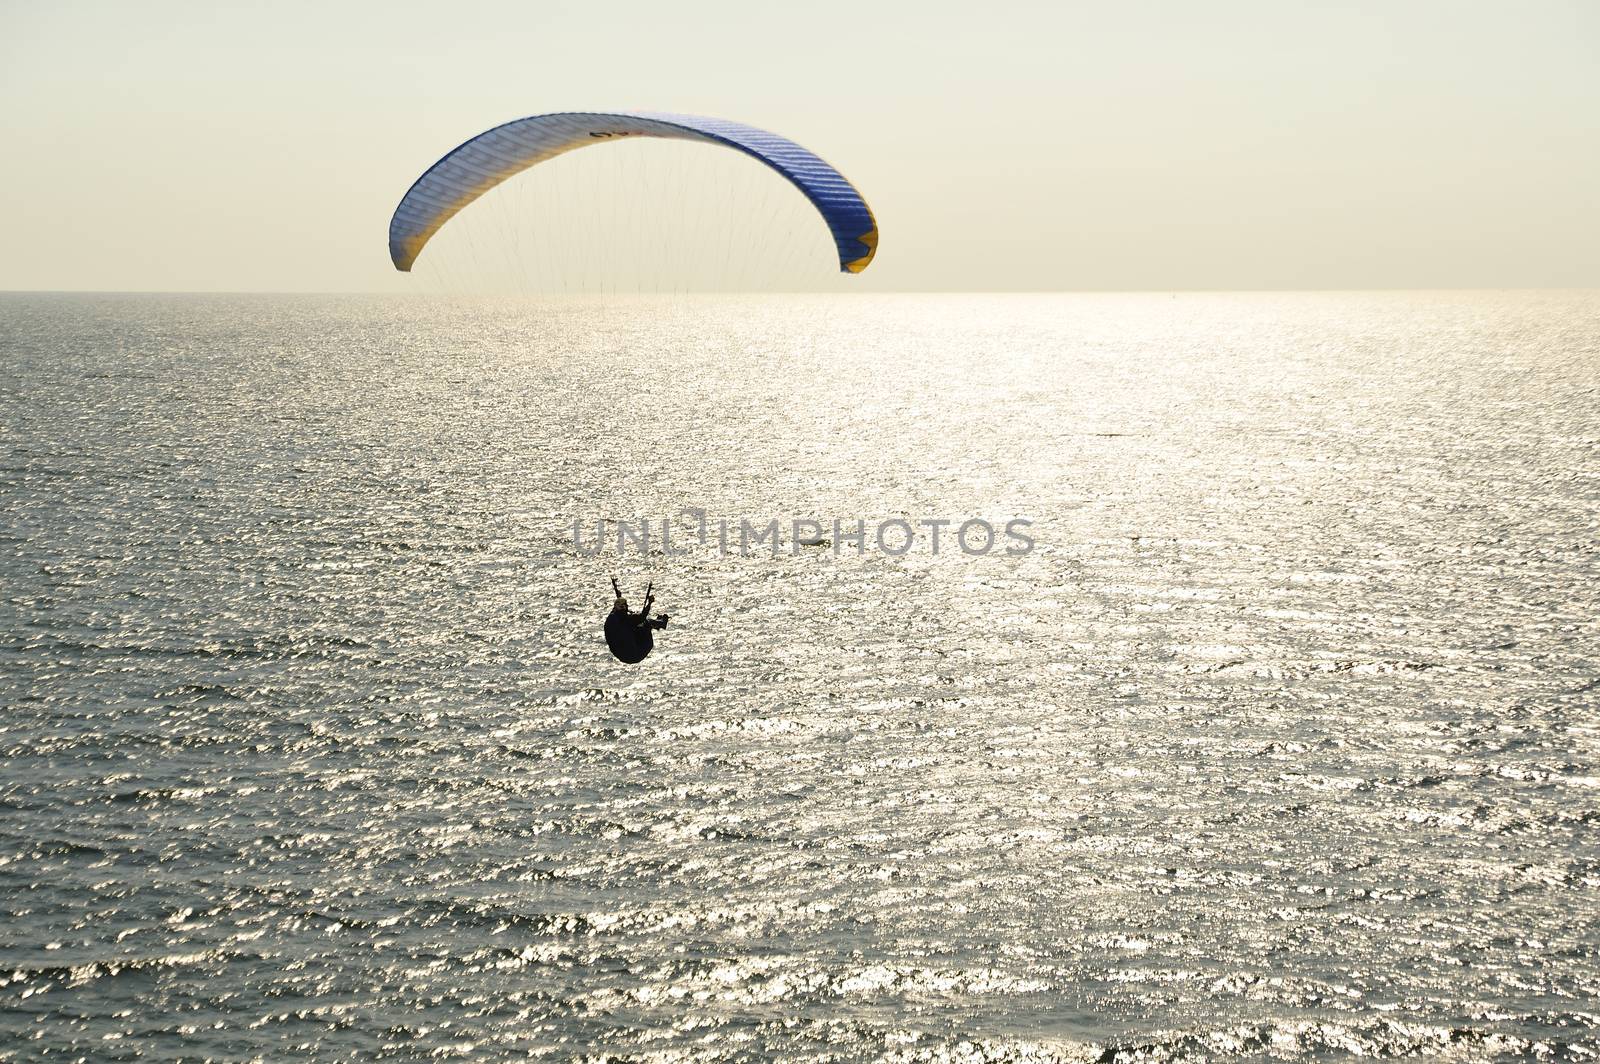 Paragliding by a40757